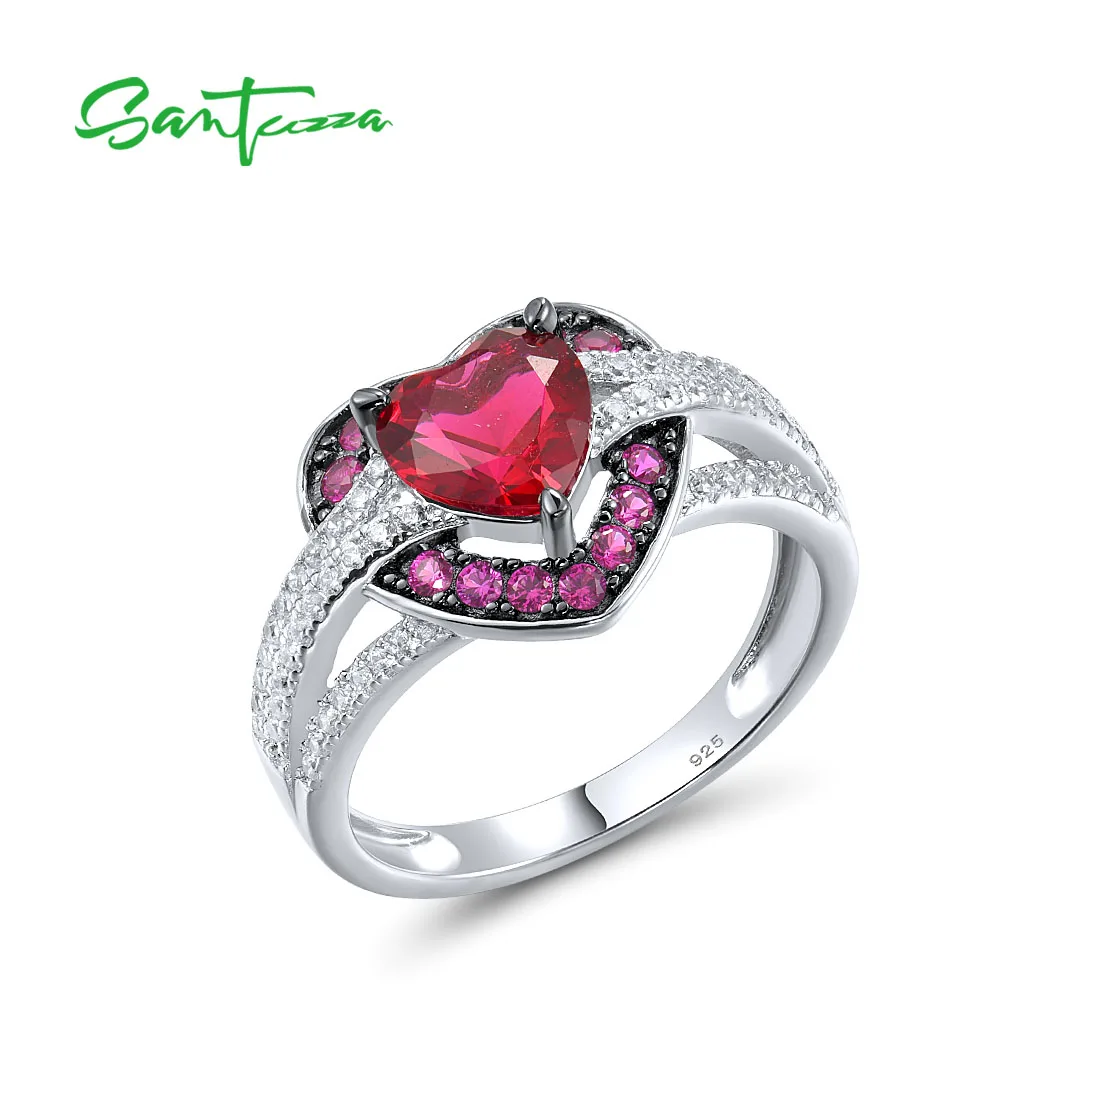 

SANTUZZA 925 Sterling Silver Rings For Women Sparkling Red Stones White CZ Heart Solitaire Ring Gorgeous Wedding Fine Jewelry